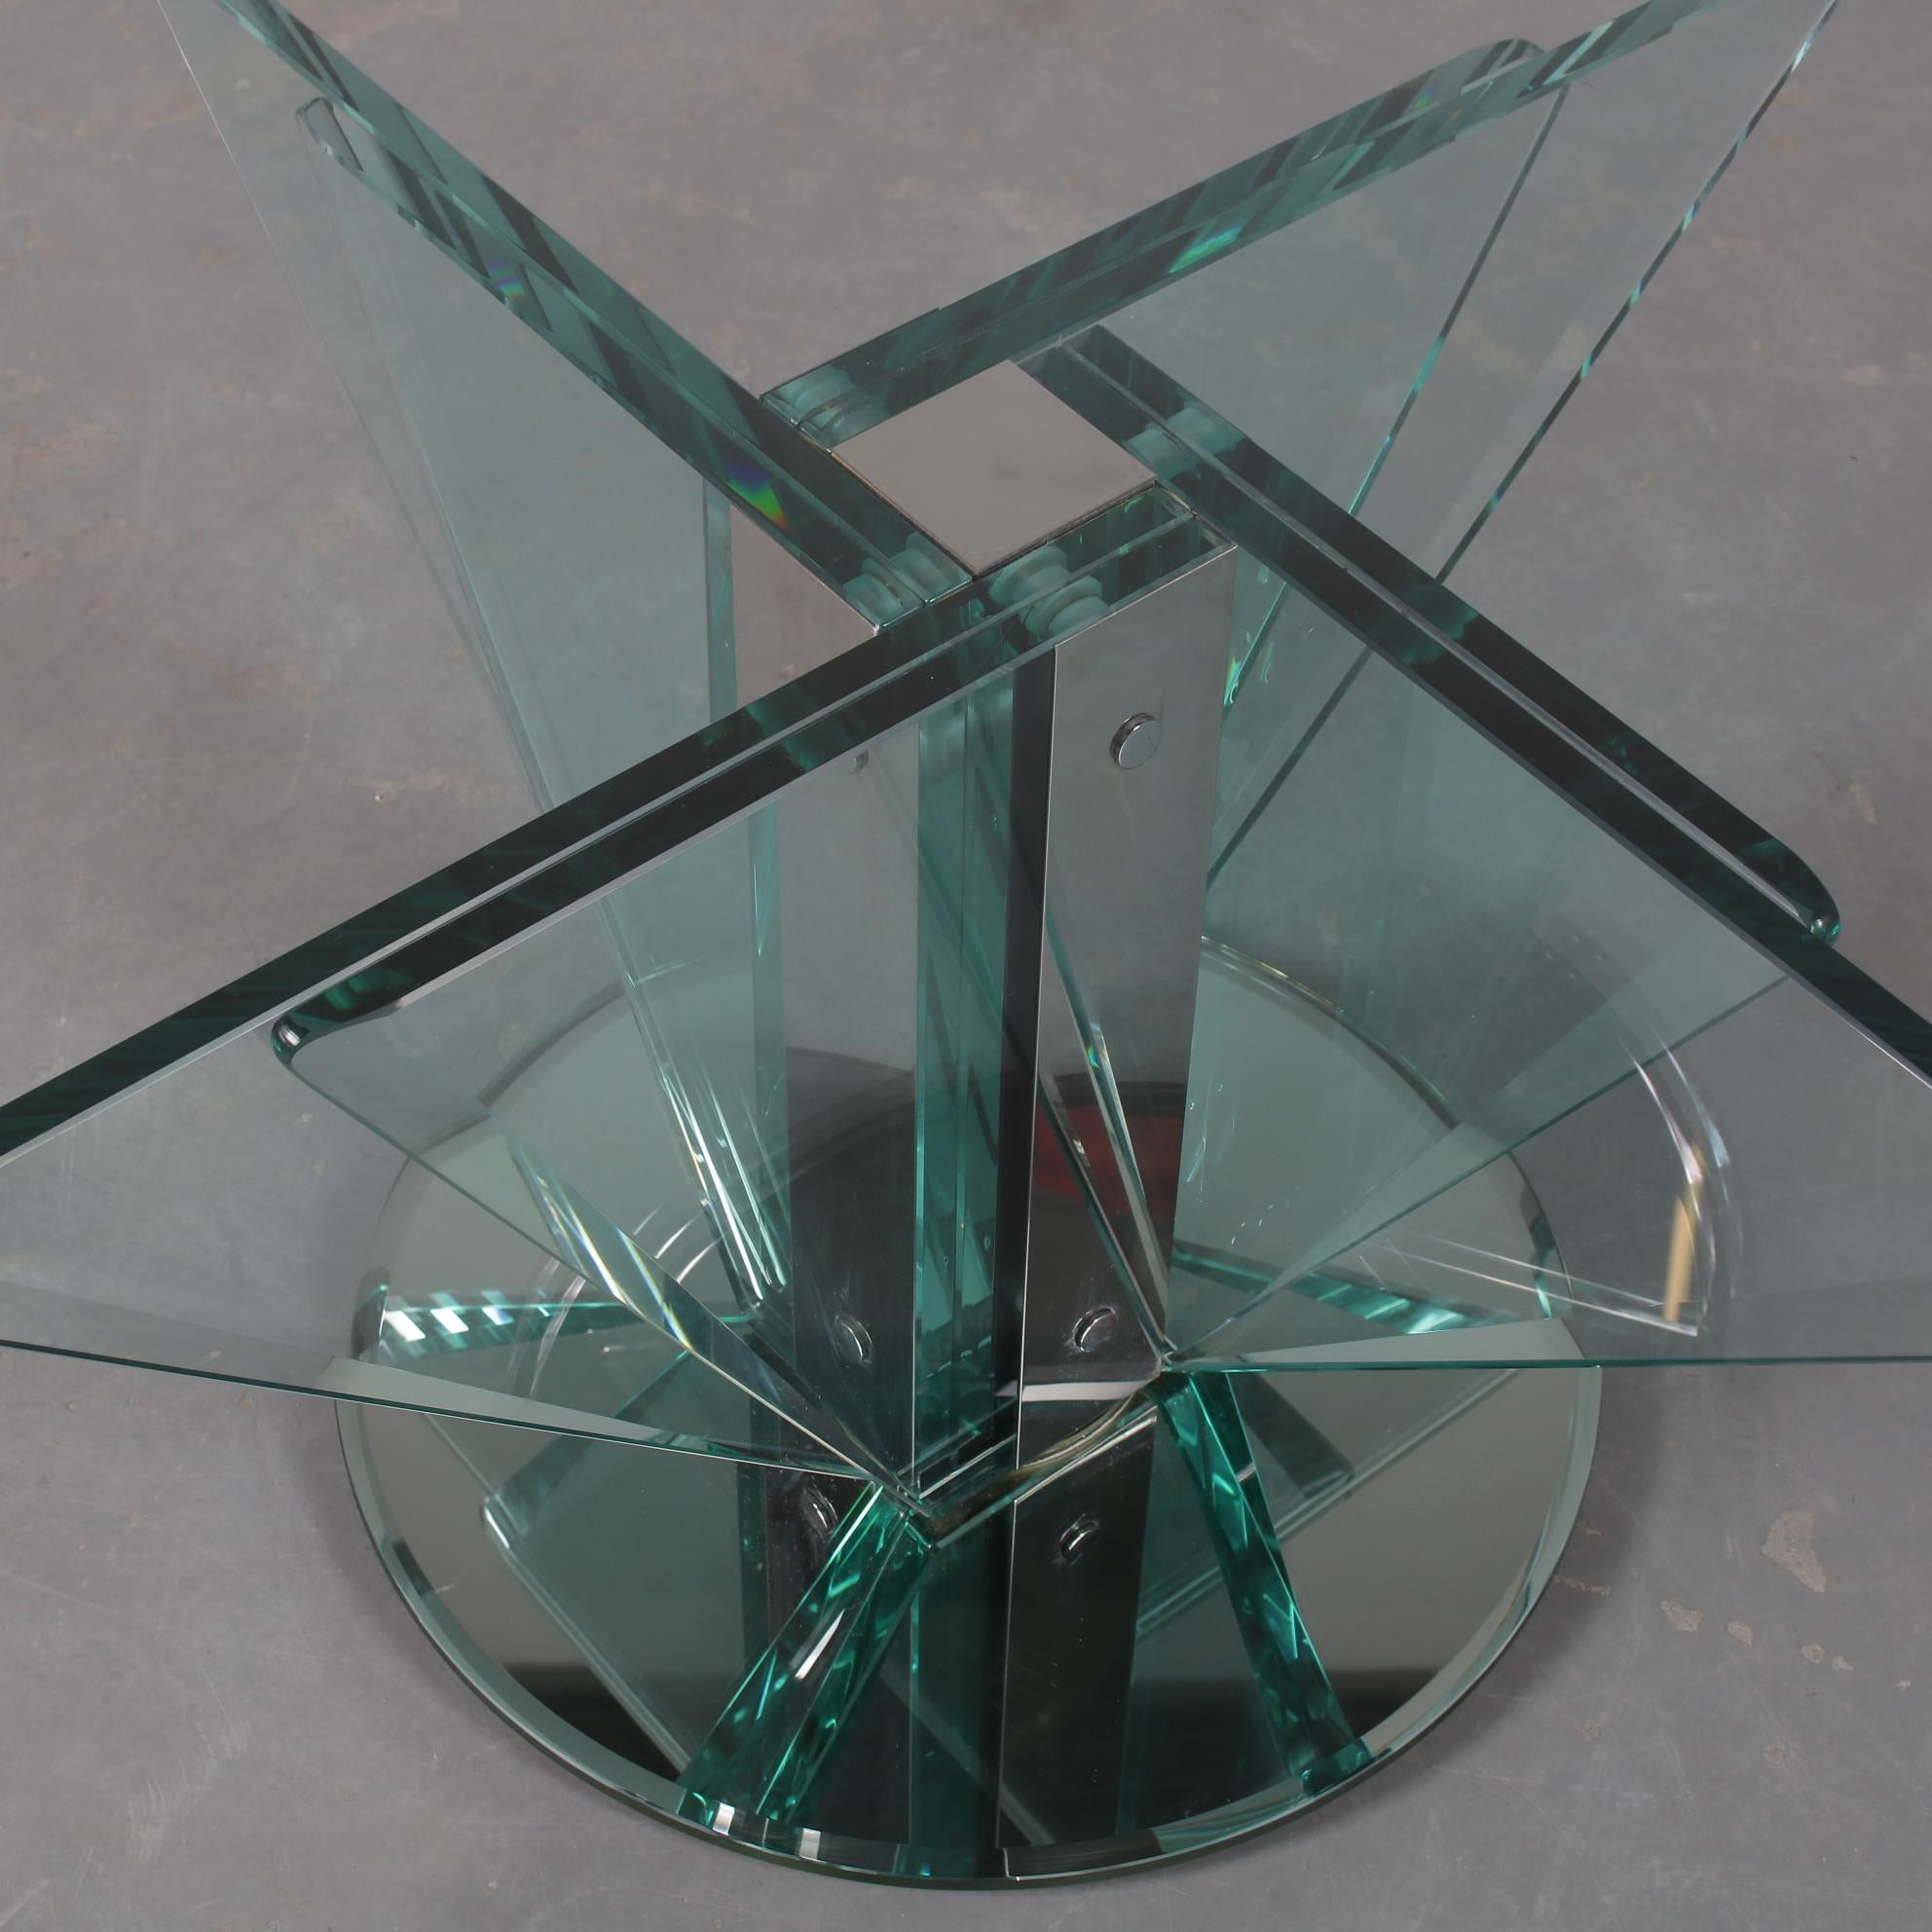 Late 20th Century Nile Glass Coffee Table attributed to Pietro Chiesa for Fontana Arte, Italy 1970